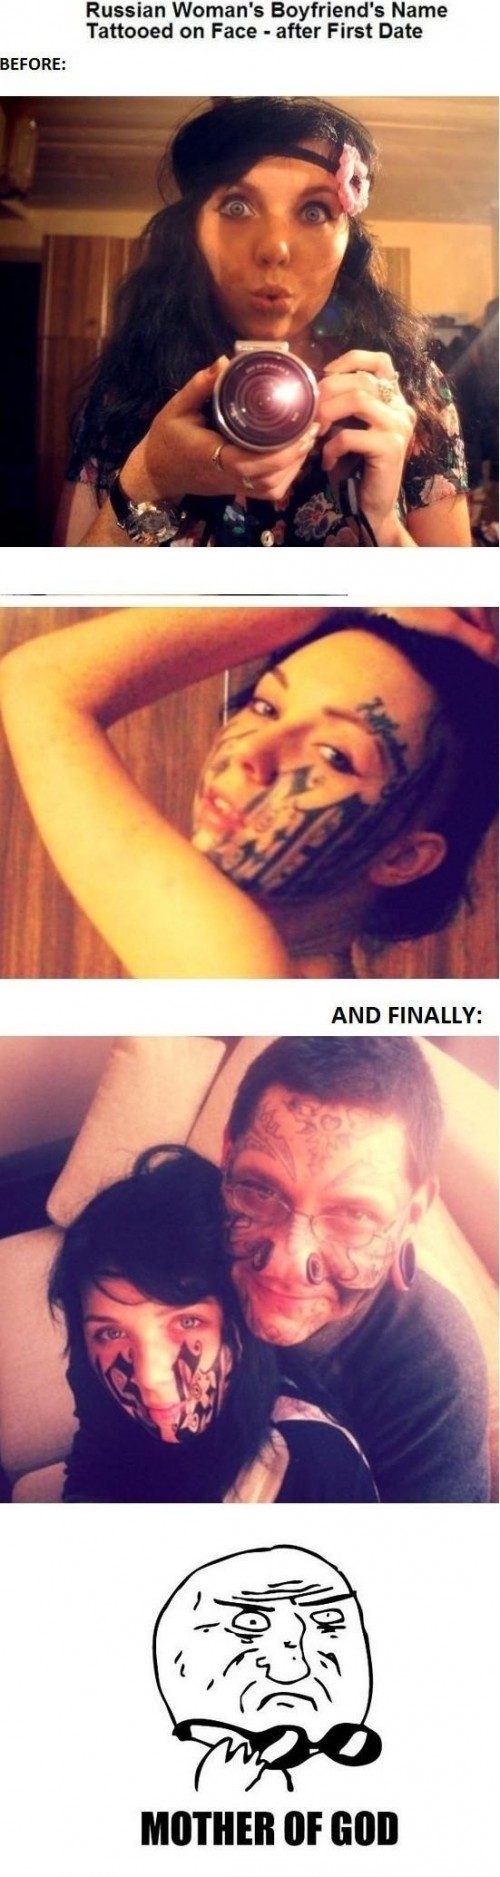 A Russian Woman Tattooed Her Boyfriends Name On Her Face After Their First Date!